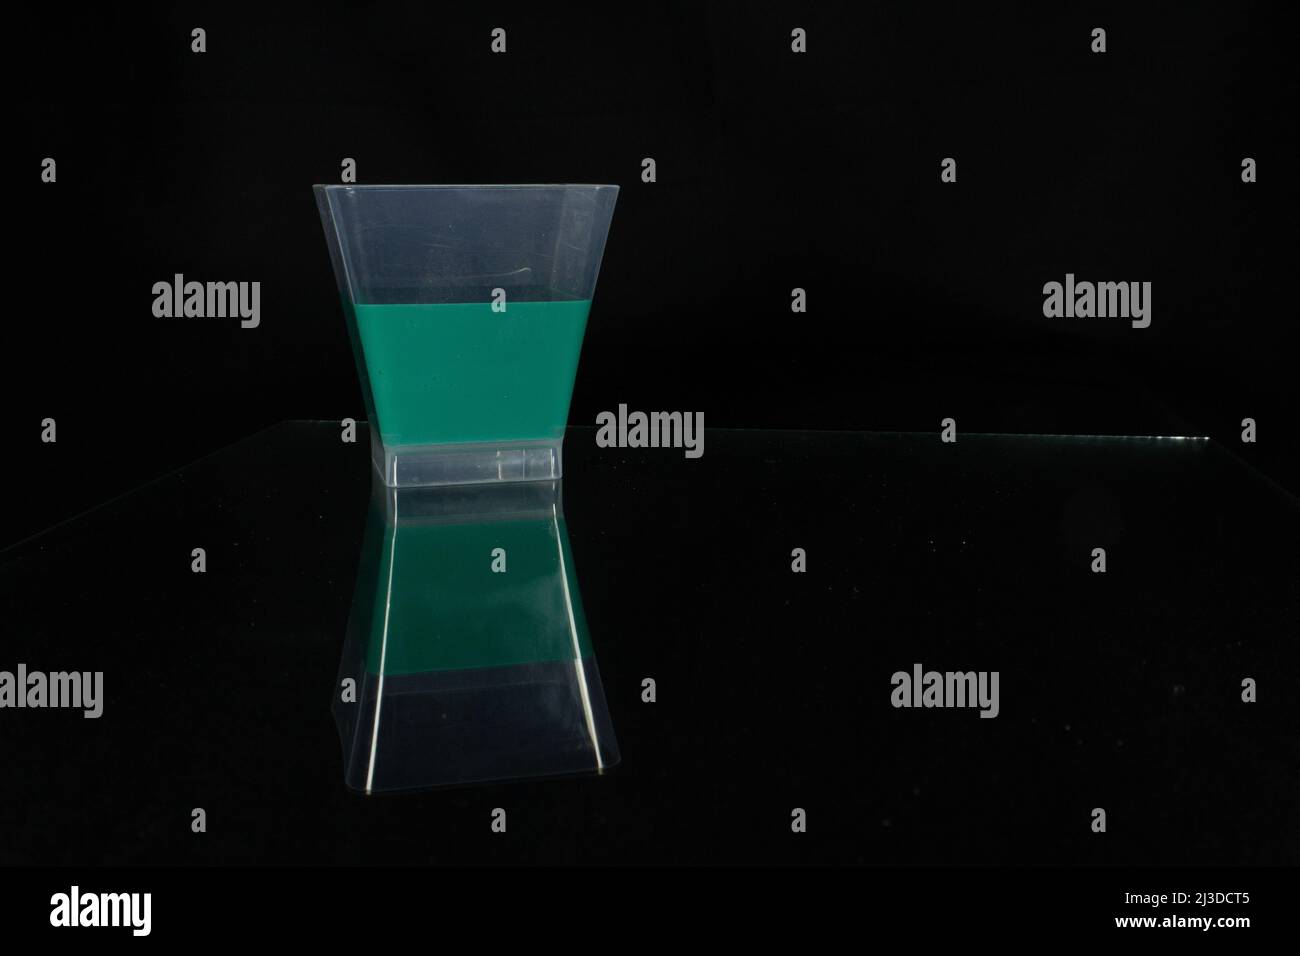 single plastic cup half full of green liquid isolated on a black background reflected in glass Stock Photo